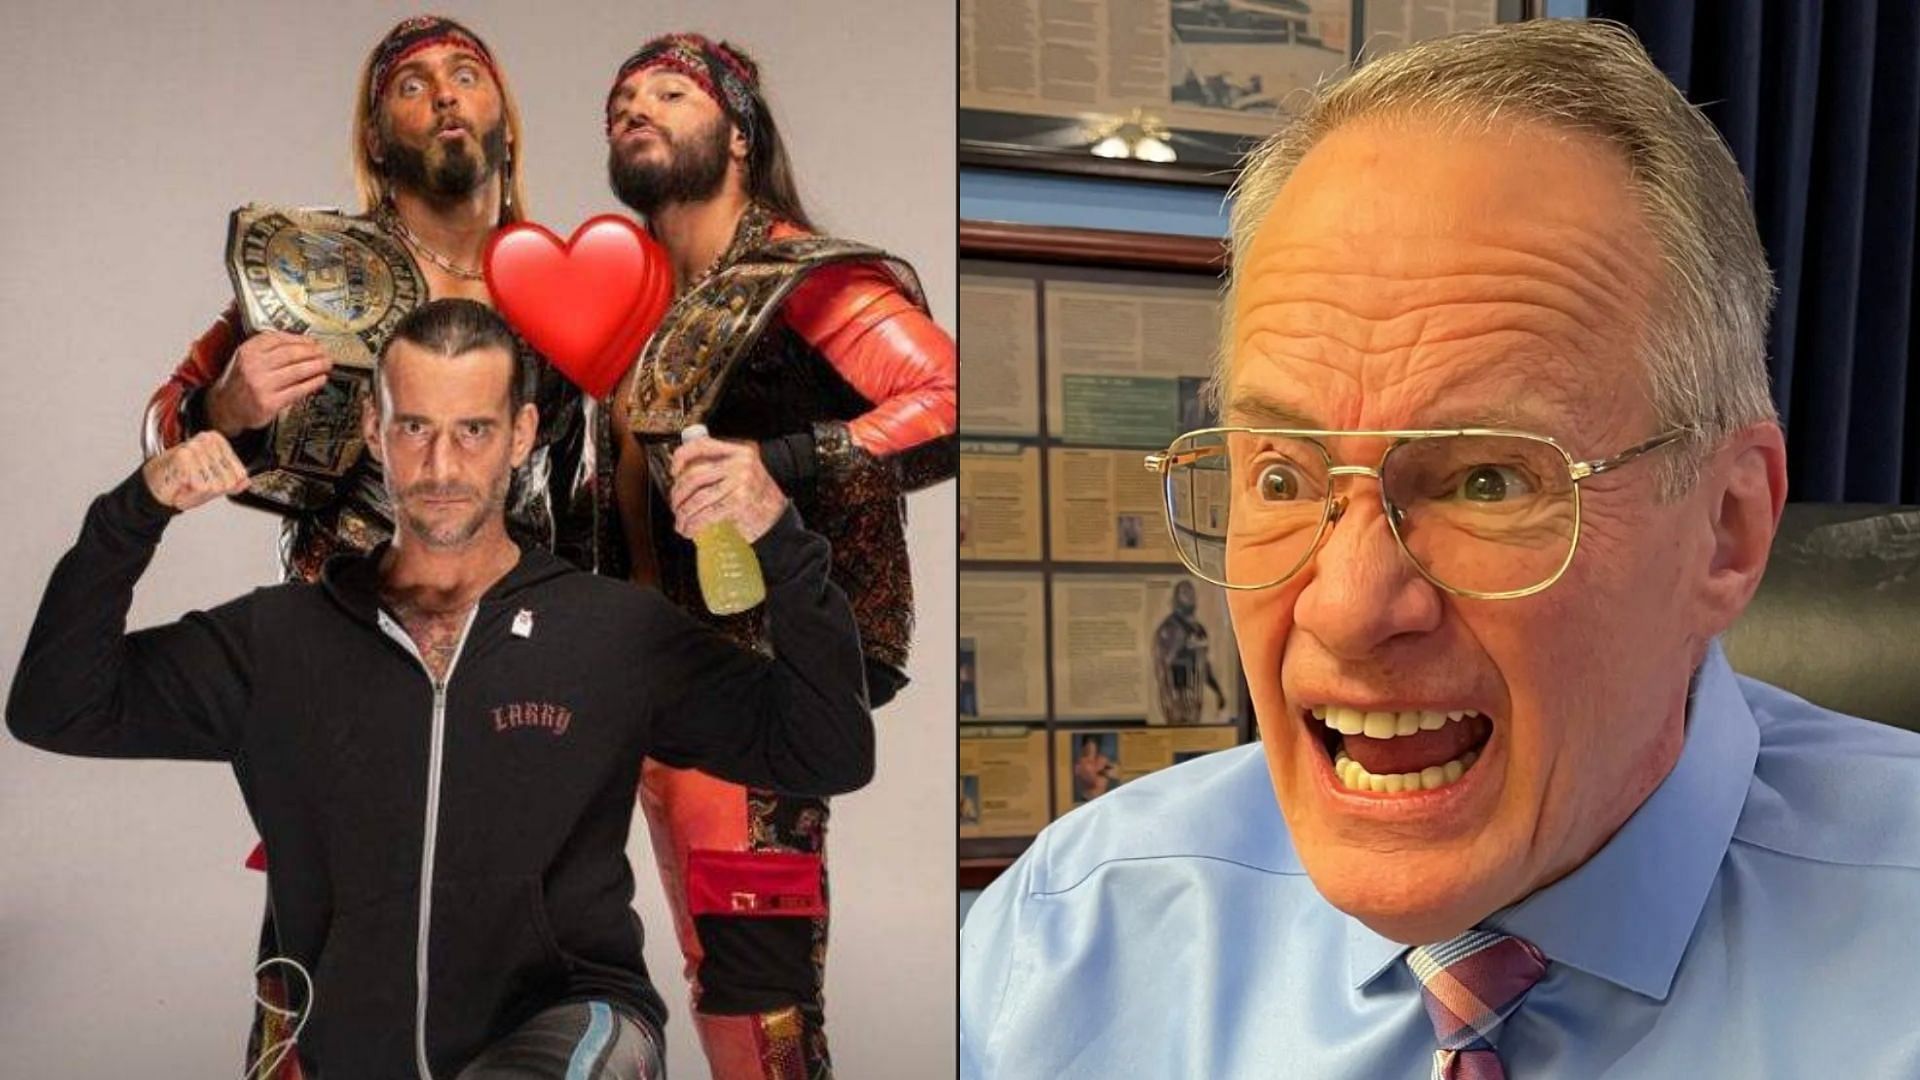 Jim Cornette is not happy with The Young Bucks after CM Punk